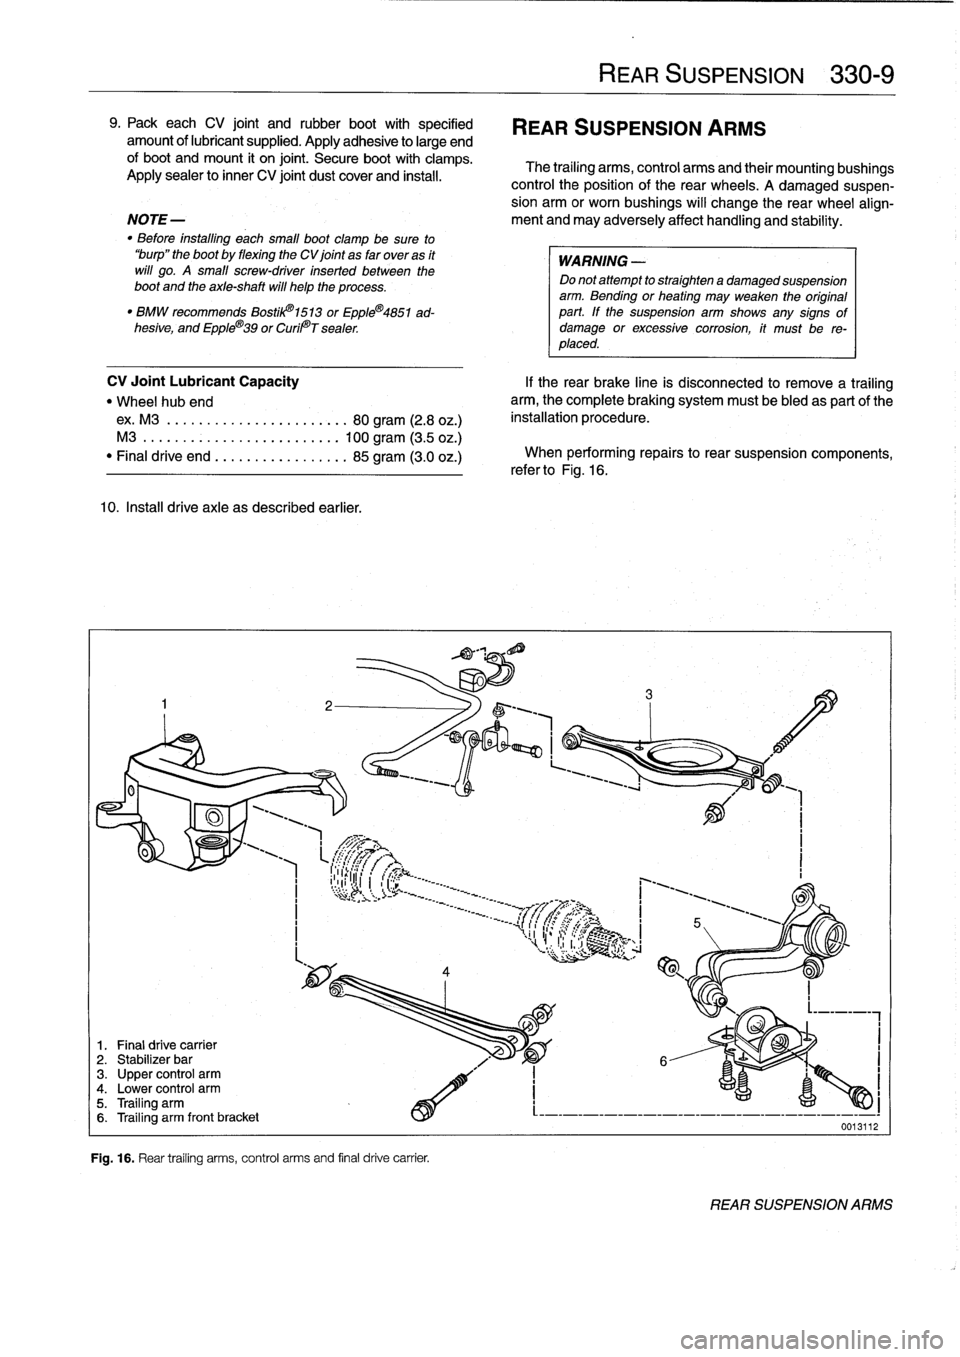 BMW 318i 1997 E36 Service Manual 9
.
Packeach
CV
joint
and
rubber
boot
with
specified

	

REAR
SUSPENSION
ARMS
amount
of
lubricant
supplied
.
Apply
adhesive
to
large
end
of
boot
and
mount
it
on
joint
.
Secure
boot
with
clamps
.

	

T